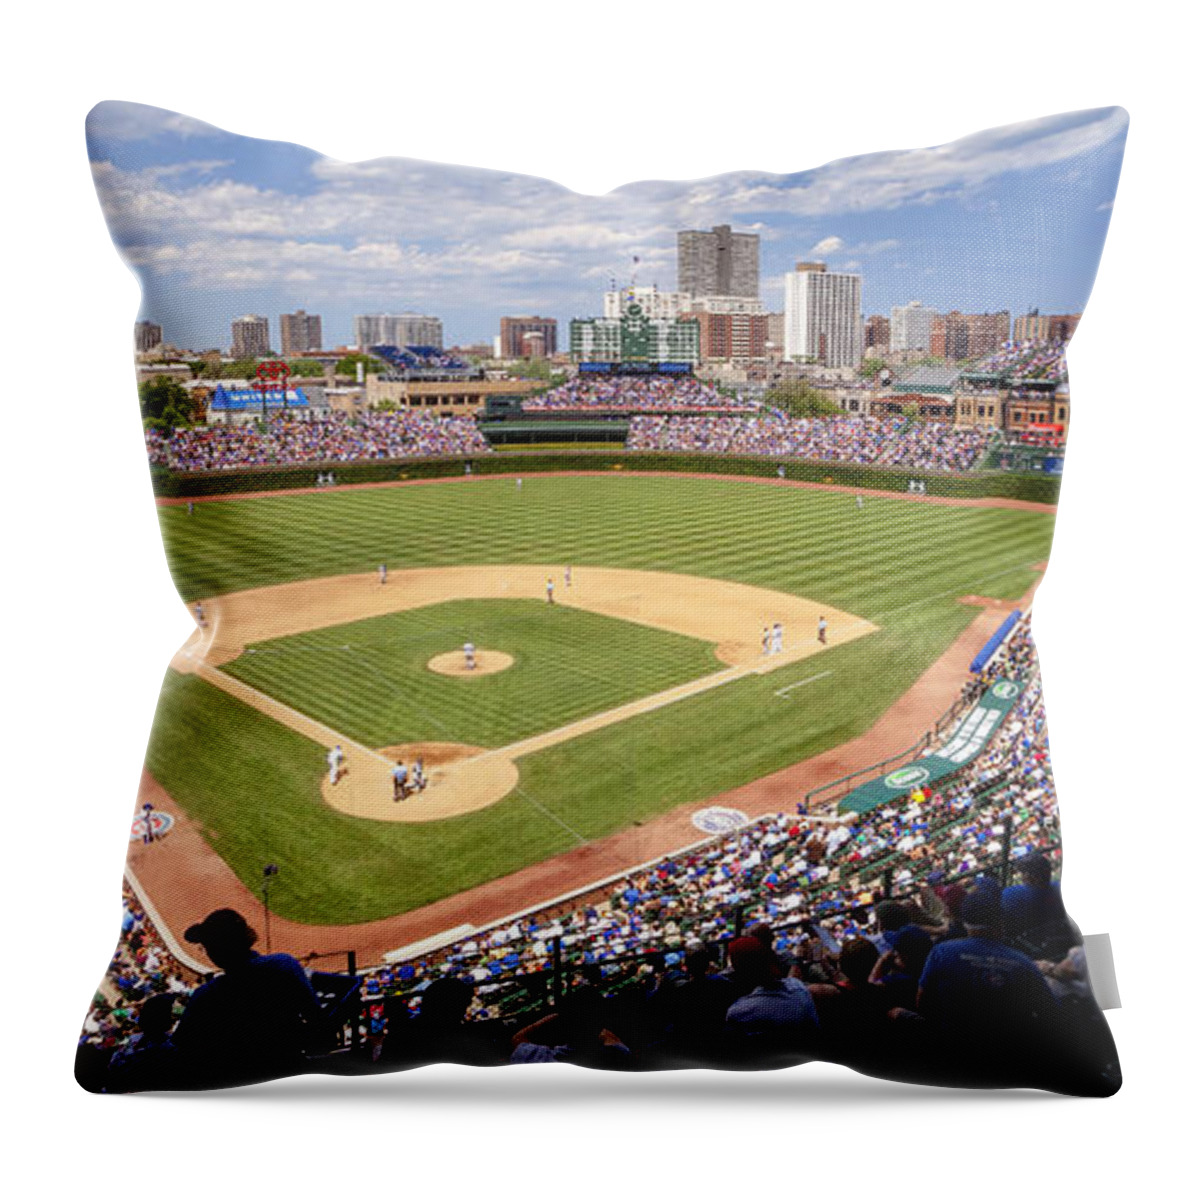 Chicago Throw Pillow featuring the photograph 0100 Wrigley Field - Chicago Illinois by Steve Sturgill